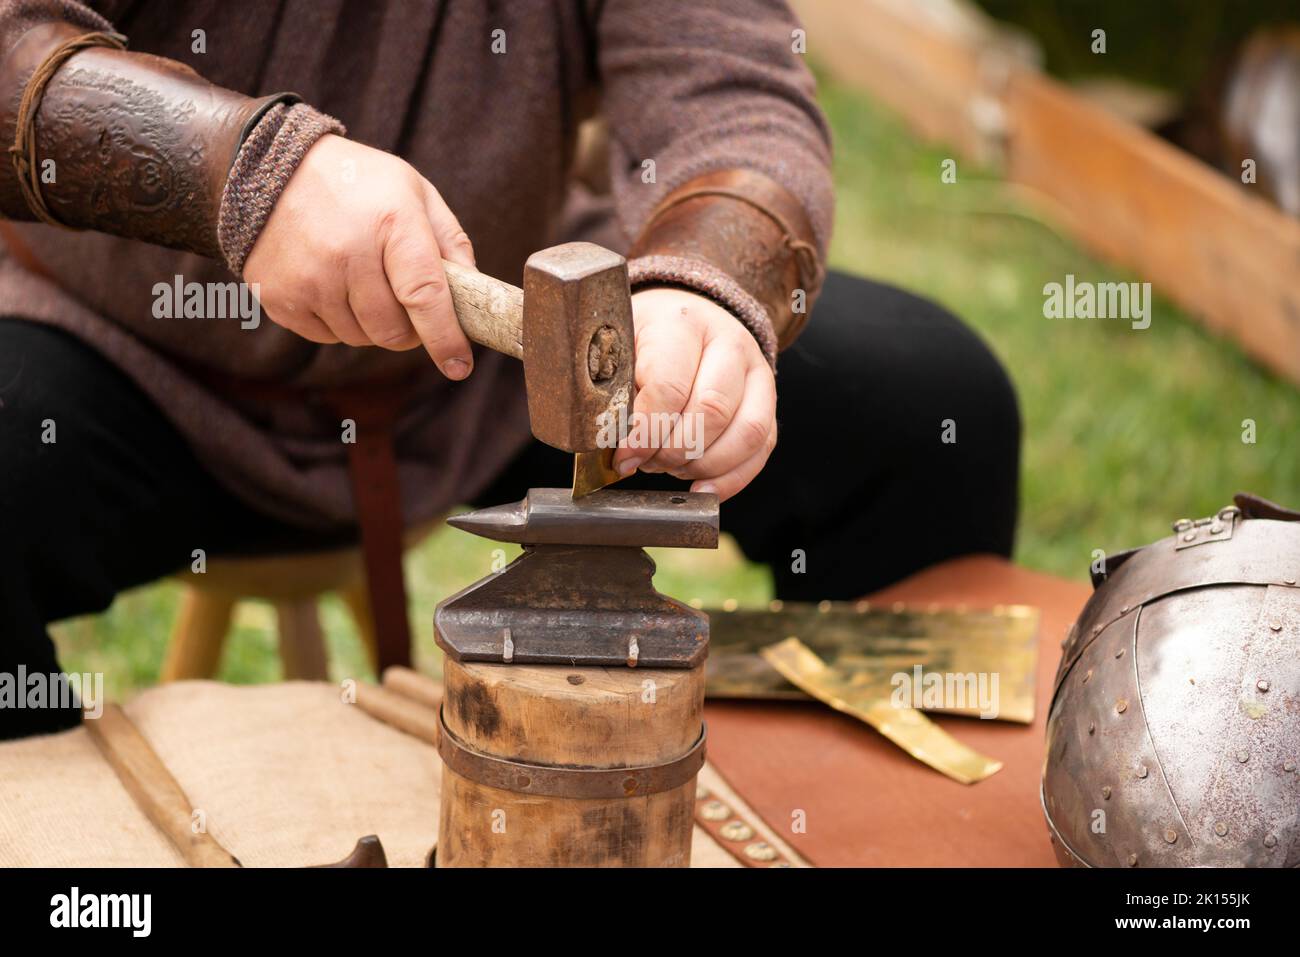 Close up of man's hands of a medieval blacksmith reenactment of 4th Century Roman life during the 'Serdica is my Rome' heritage festival in Sofia, Bul Stock Photo